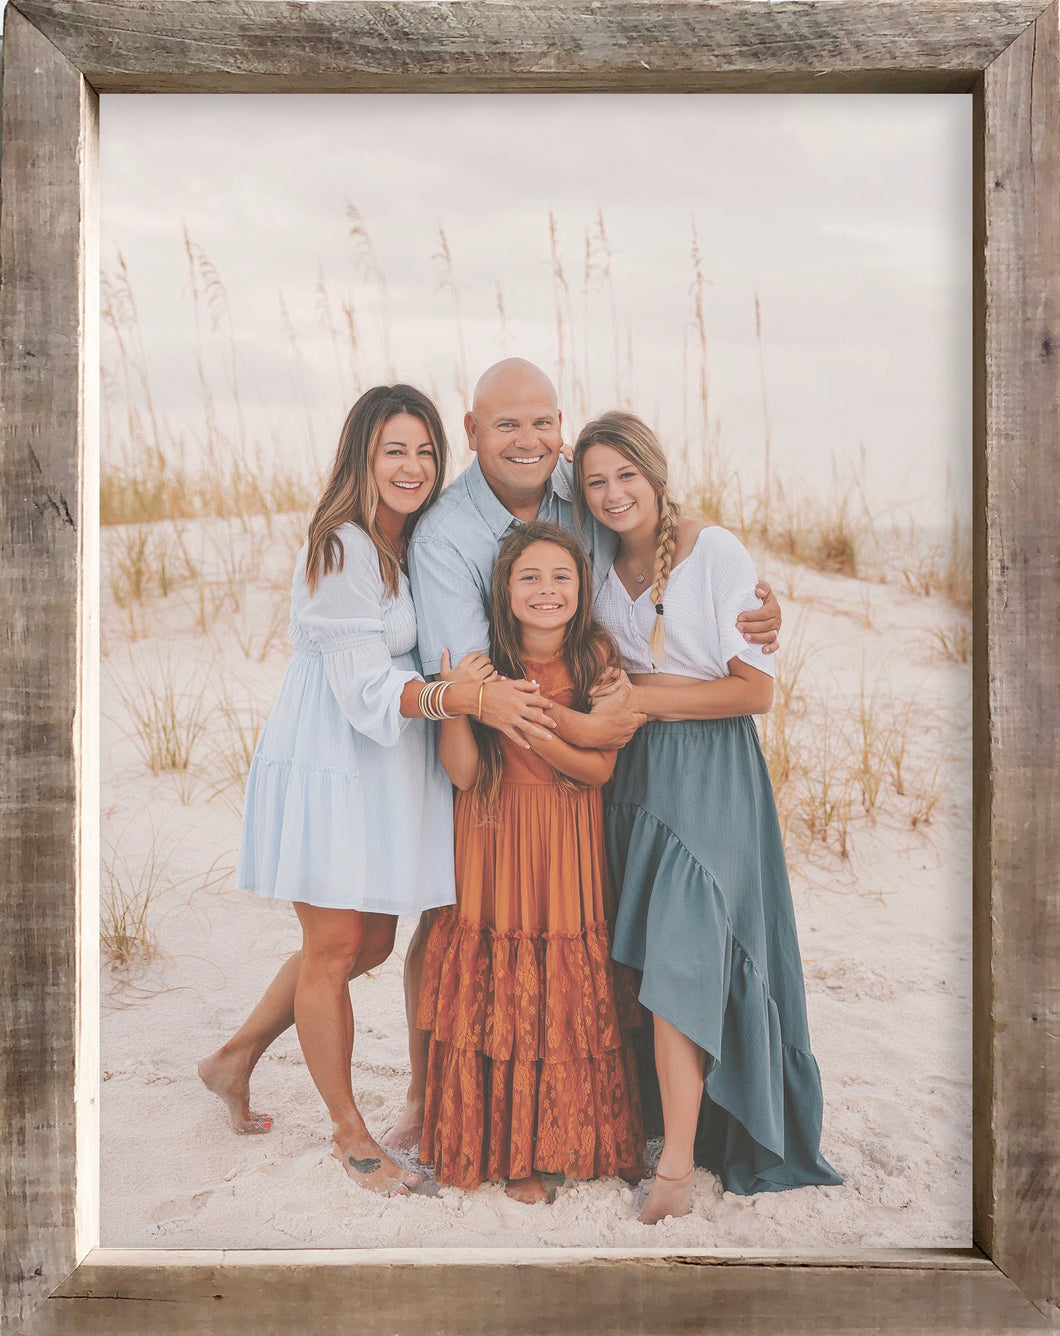 UPDATE Your 34x44 Timberwood Photo Frame